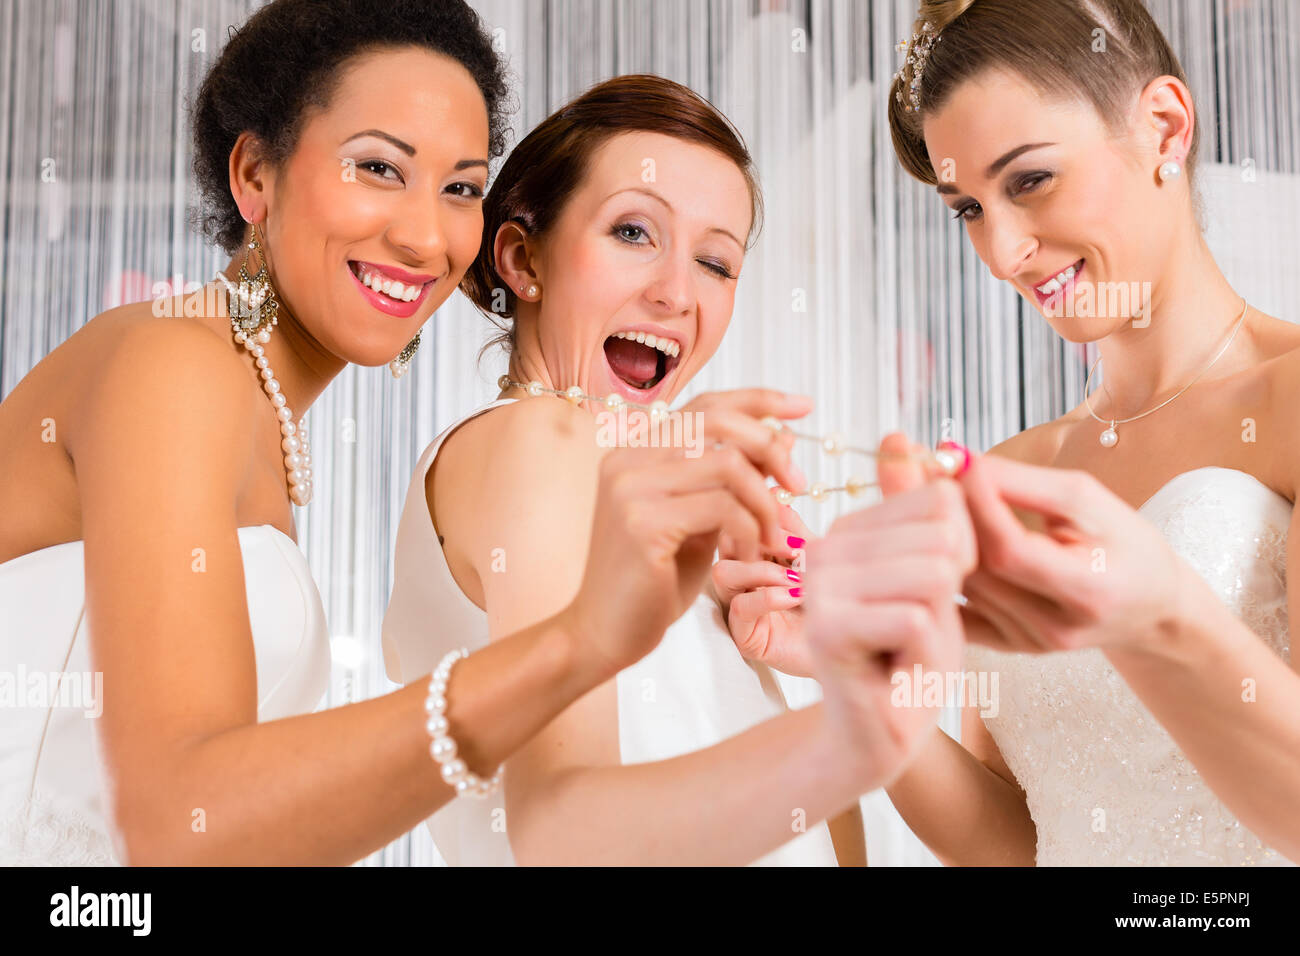 Women having fun while bridal gown fitting in wedding fashion store Stock Photo